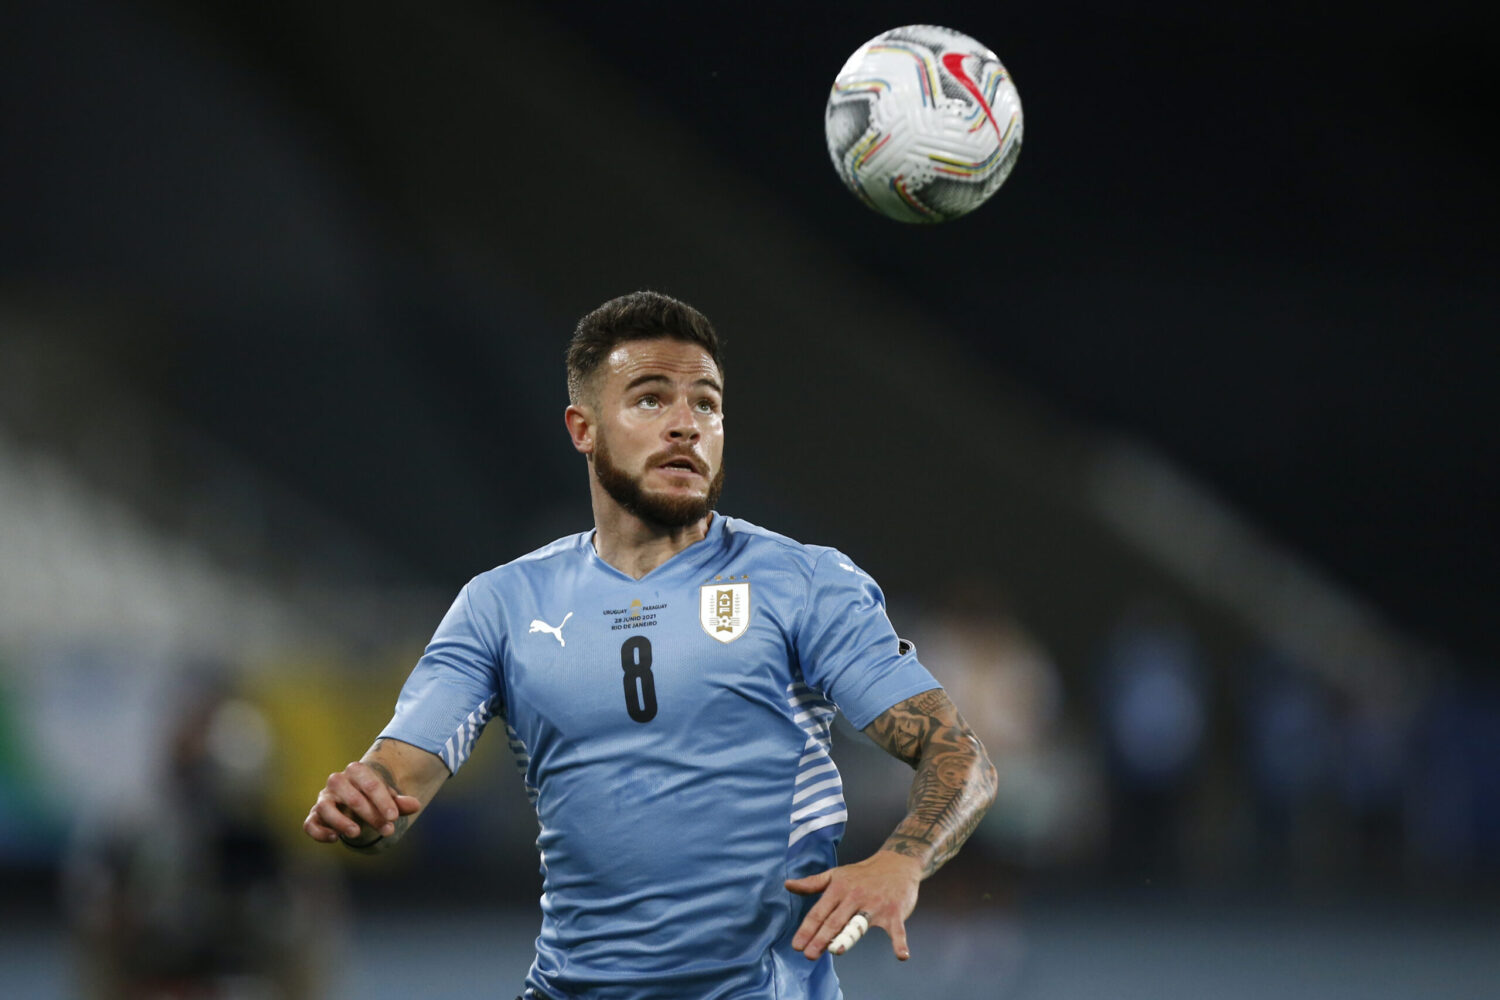 Napoli have re-opened the talks to sign Nahitan Nandez from Cagliari. They tried to do the same last summer, but his price tag was too high.